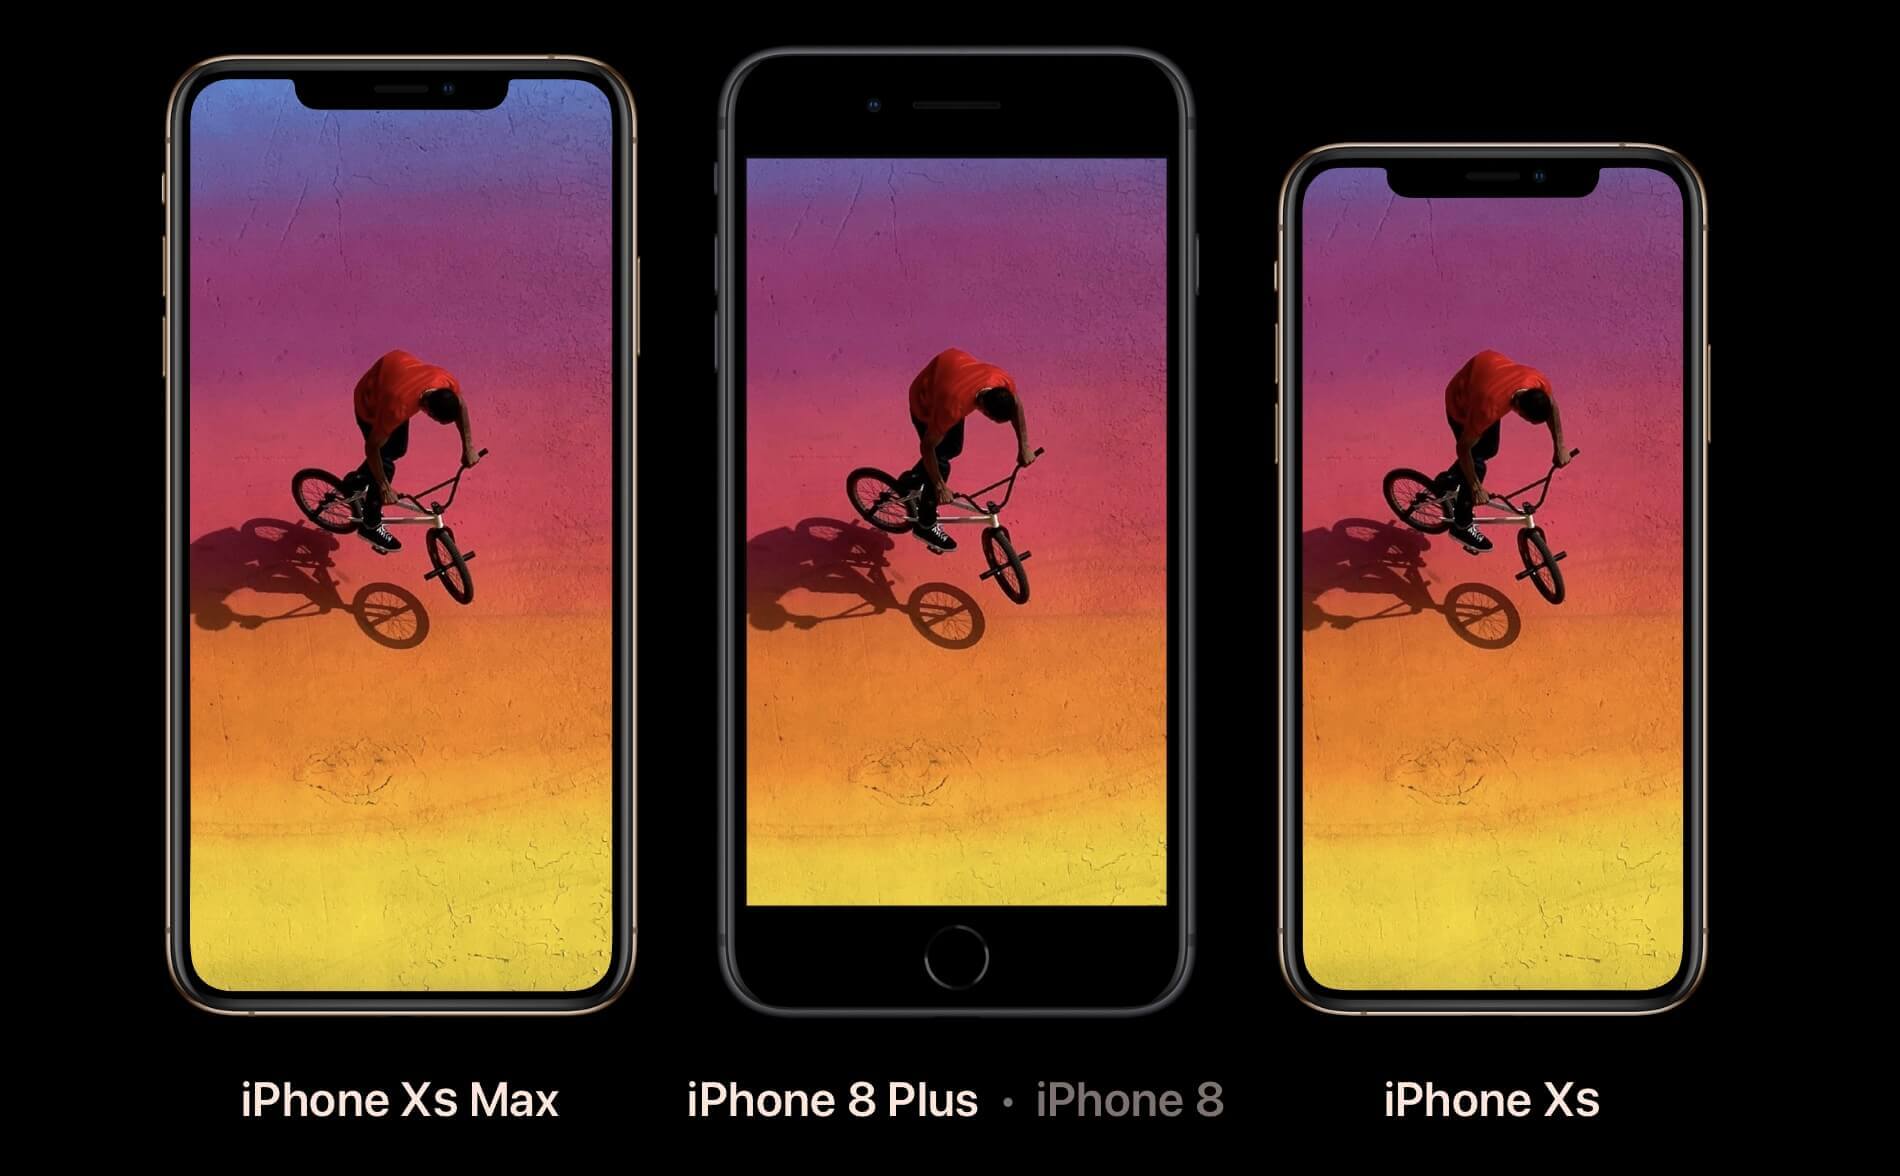 iPhone Xs and iPhone Xs Max Compare